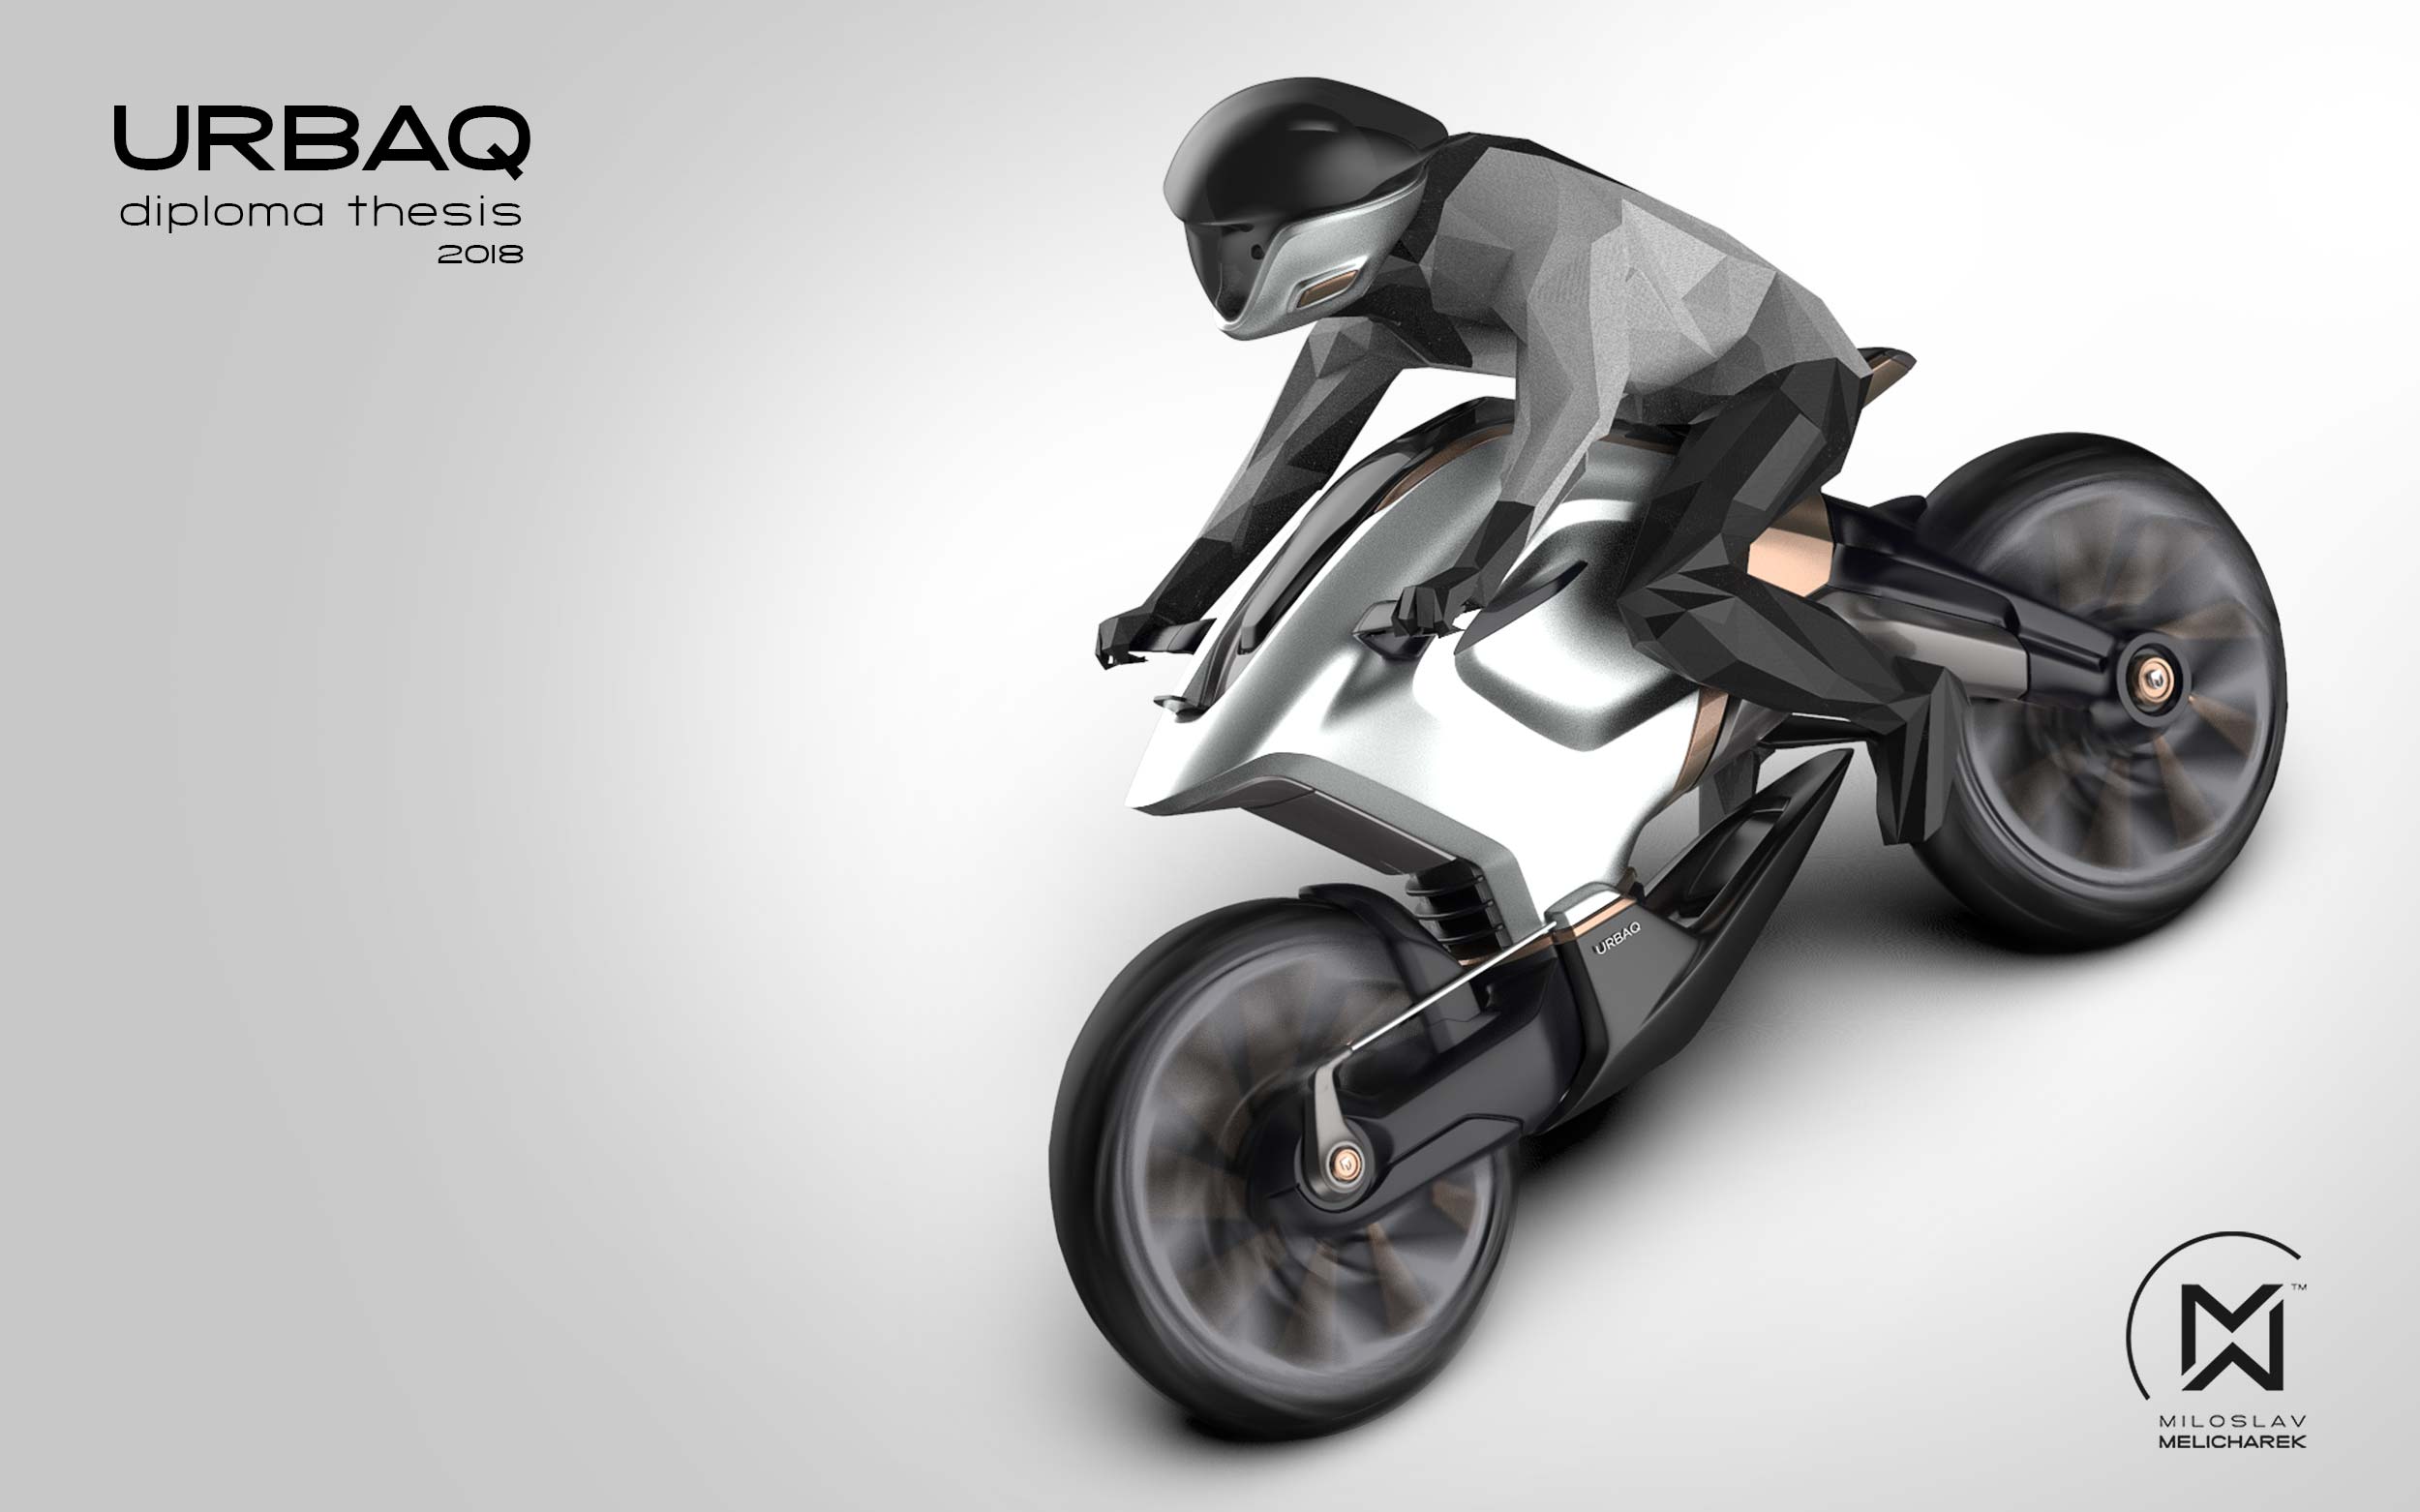 Urbaq - Motorycle of the Future - design by MMelicharek